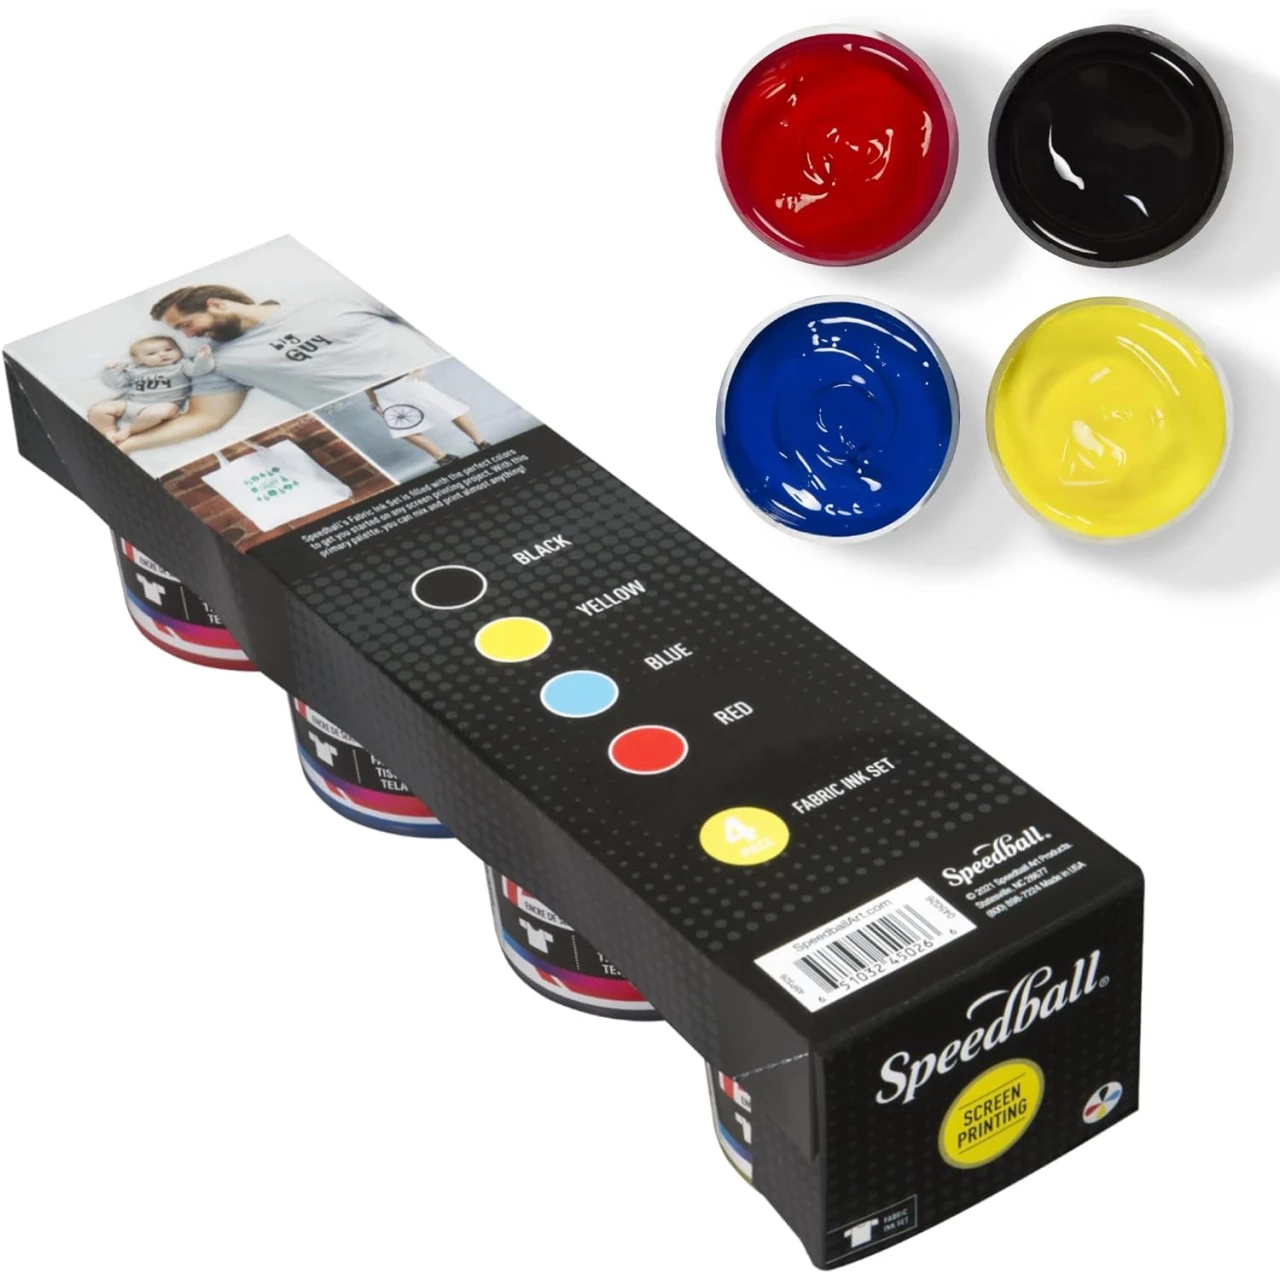 Speedball Fabric Screen Printing Ink Starter Set, 4-Colors, 4-Ounce